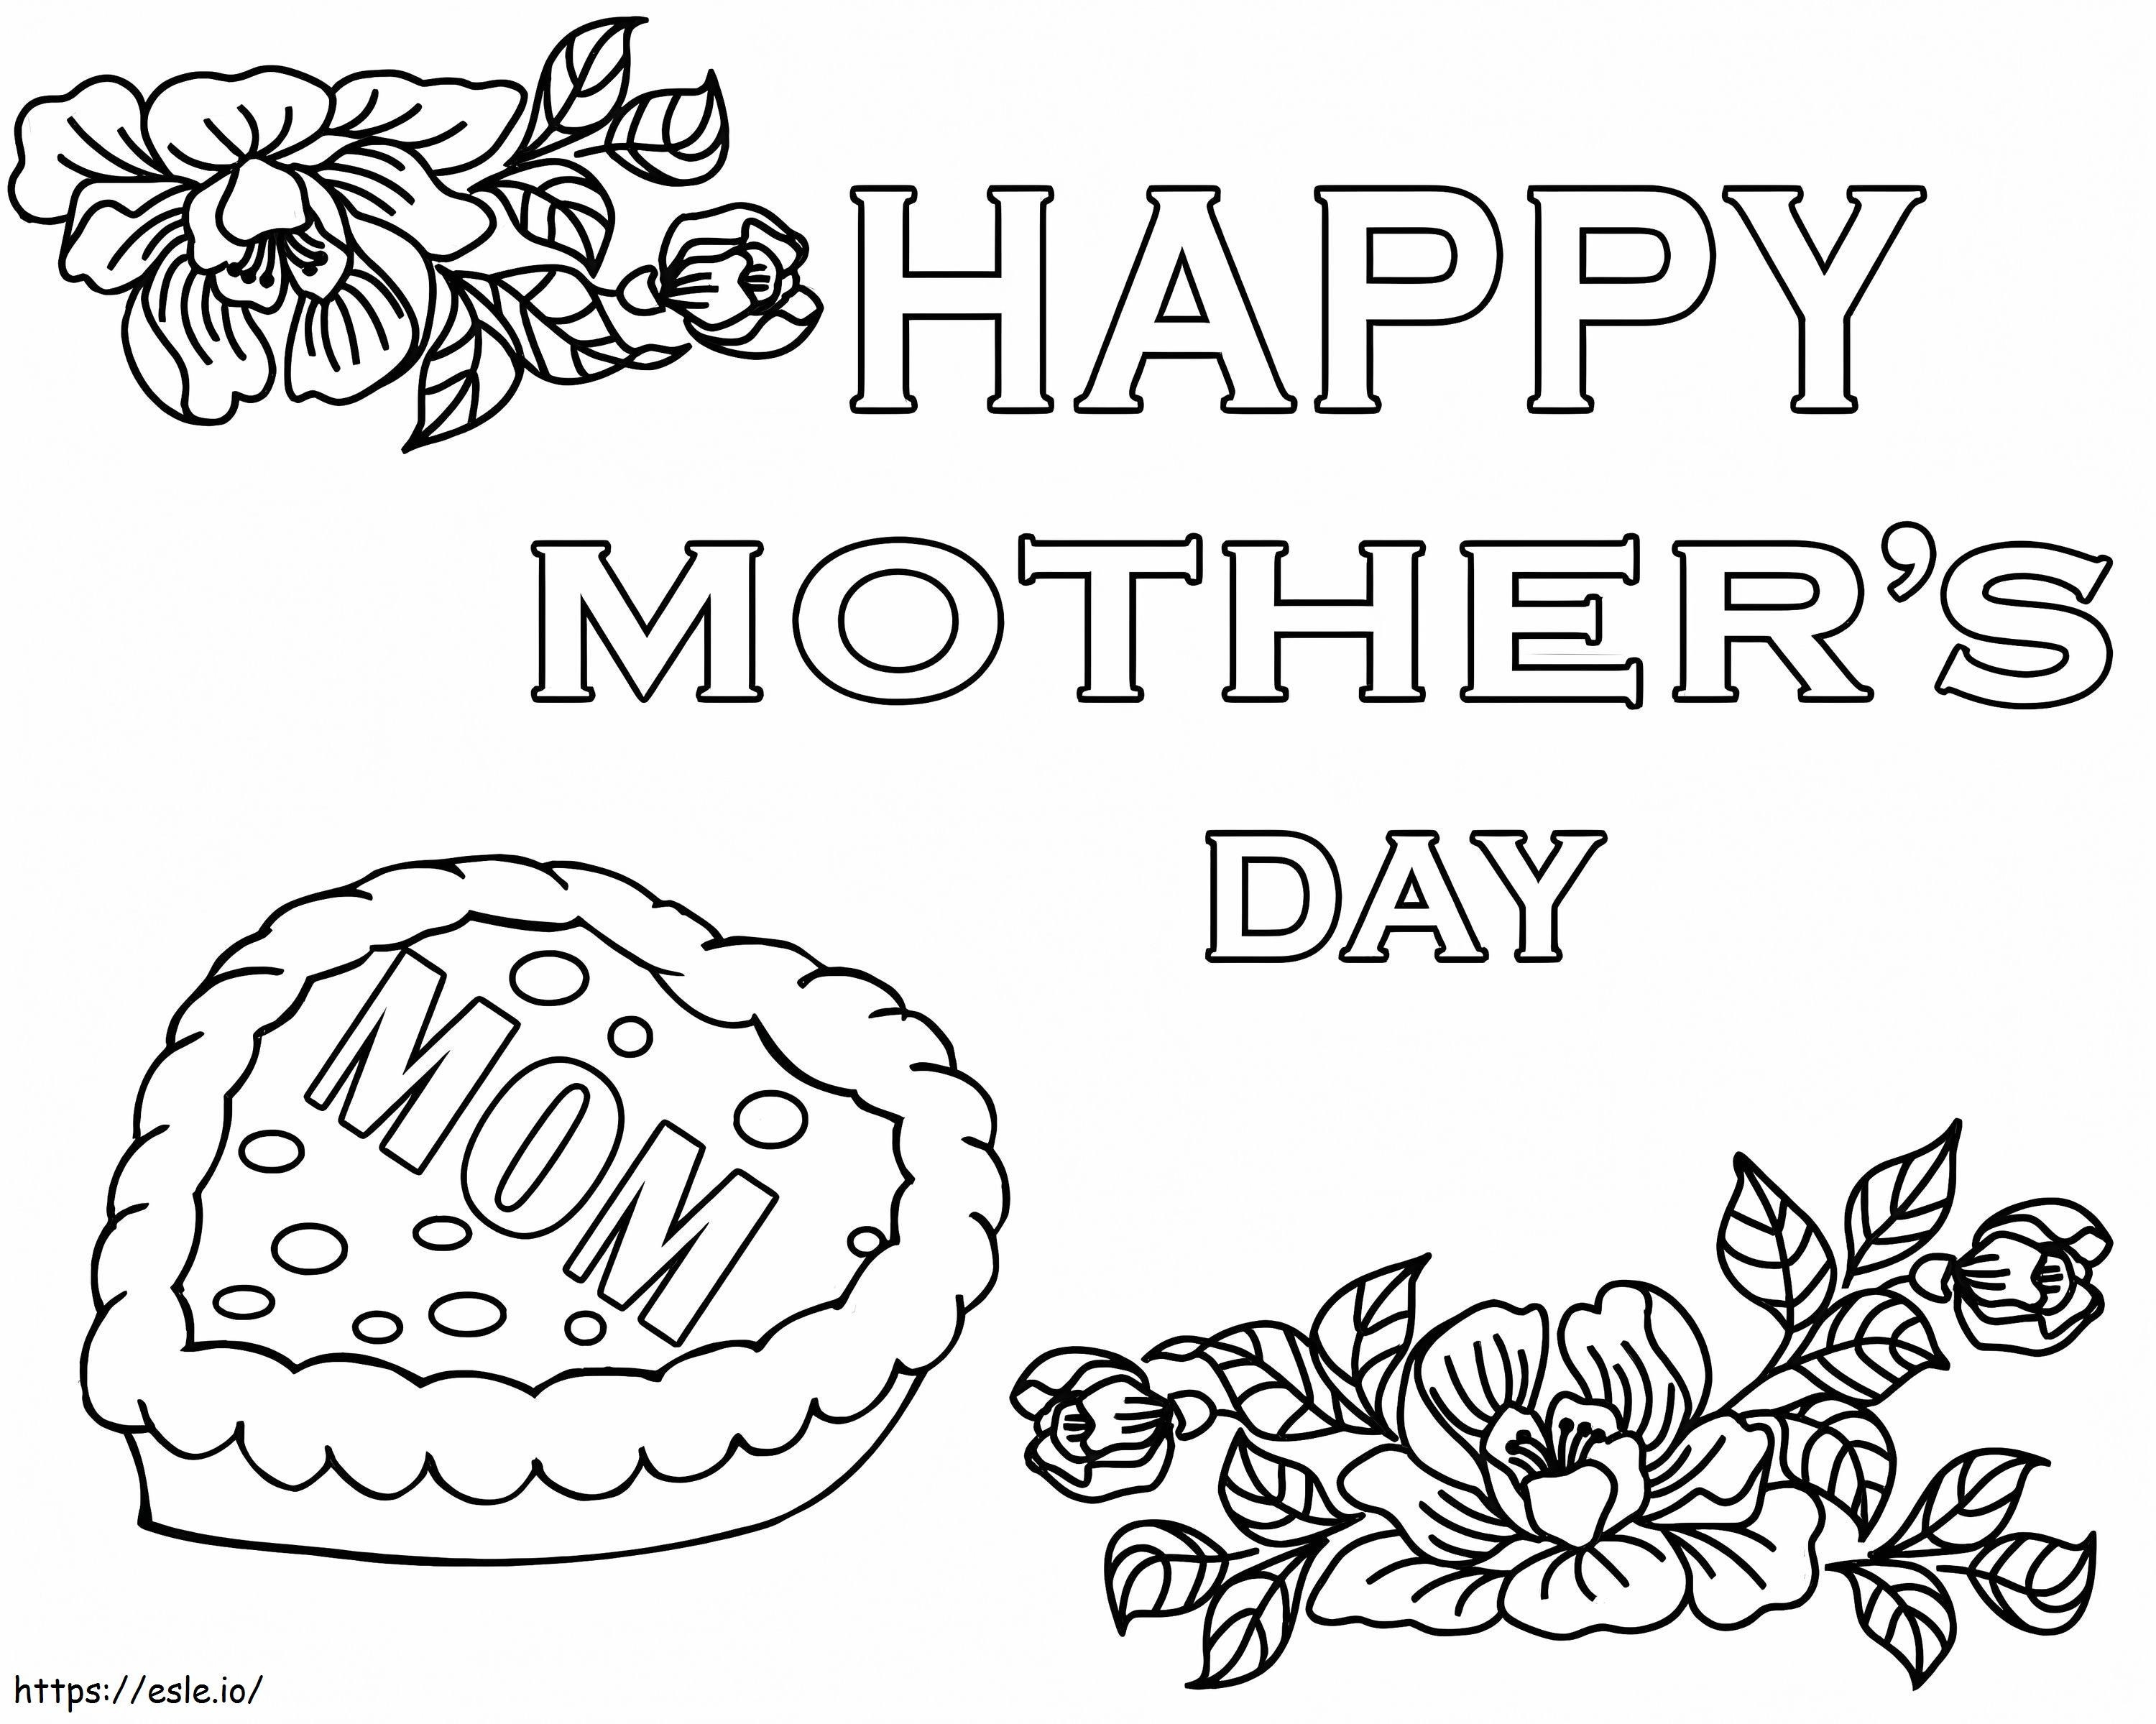 Happy Mothers Day 10 coloring page